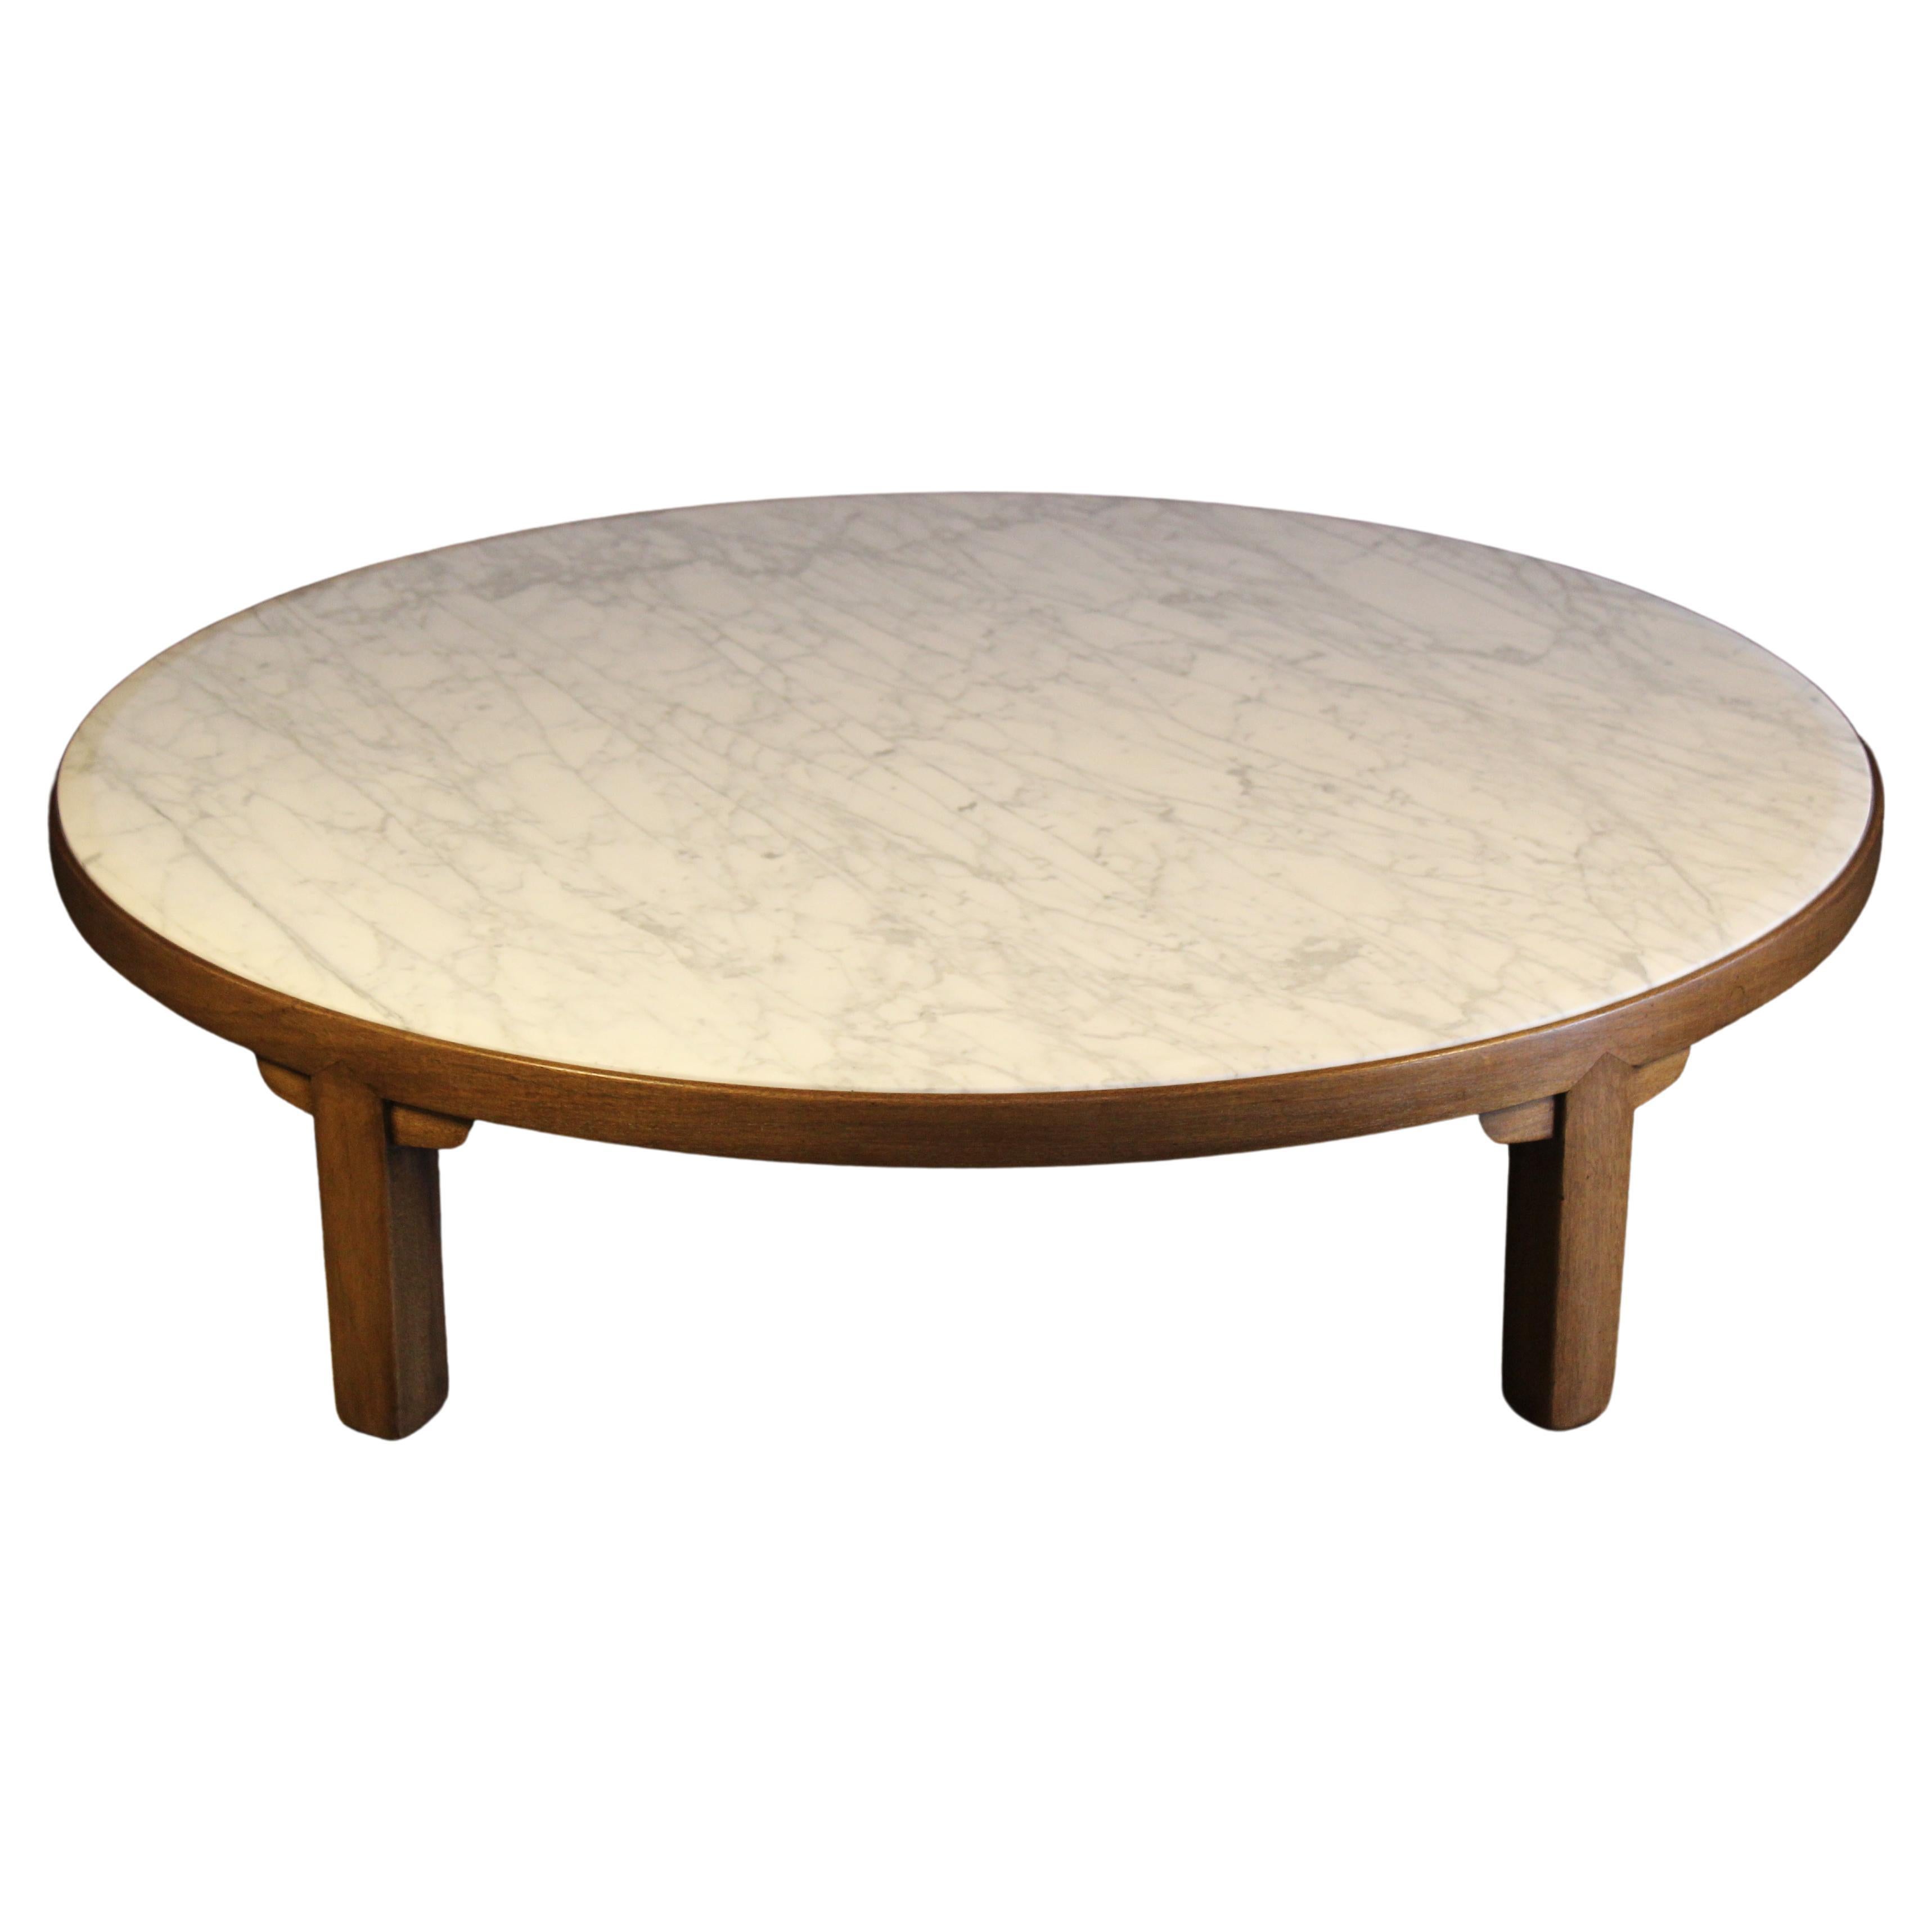 Marble Coffee Table by Edward Wormley for Dunbar, U.S.A, 1950s